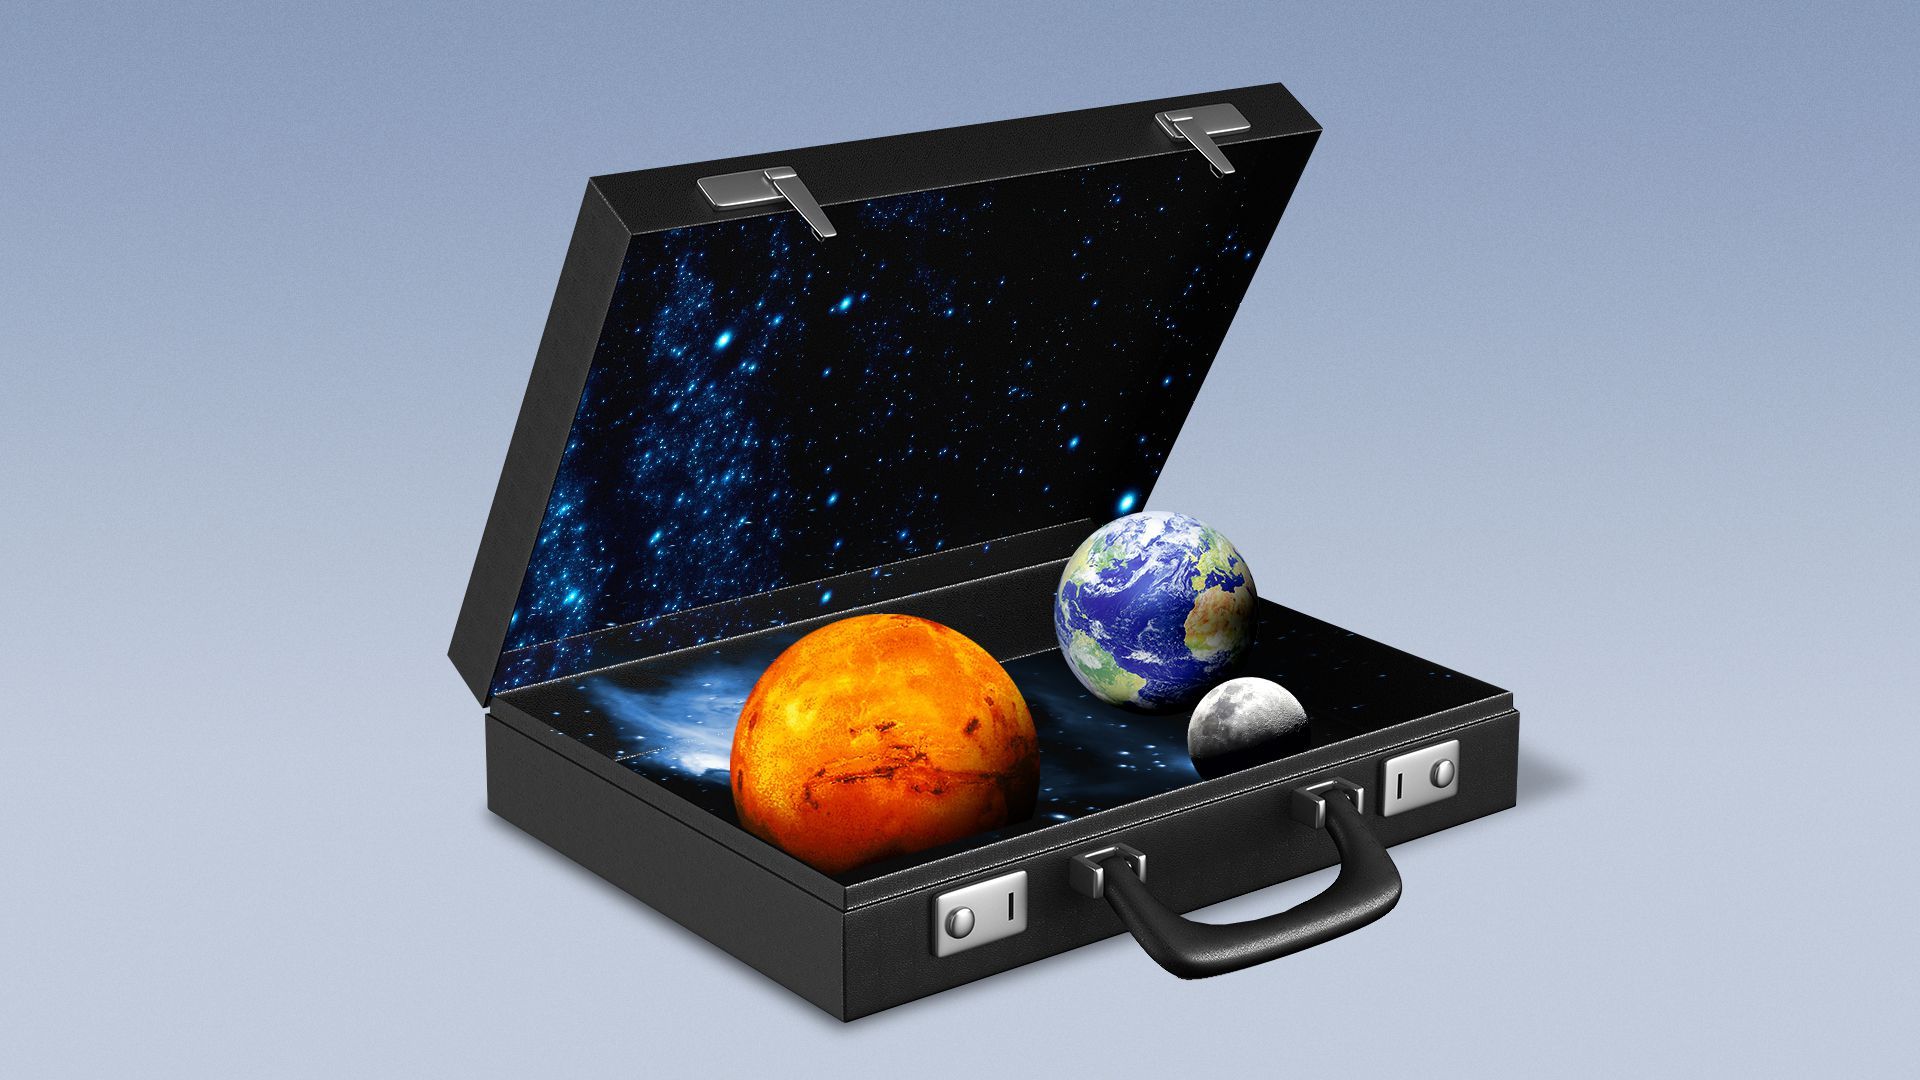 Illustration of a briefcase opened to reveal stars and planets inside